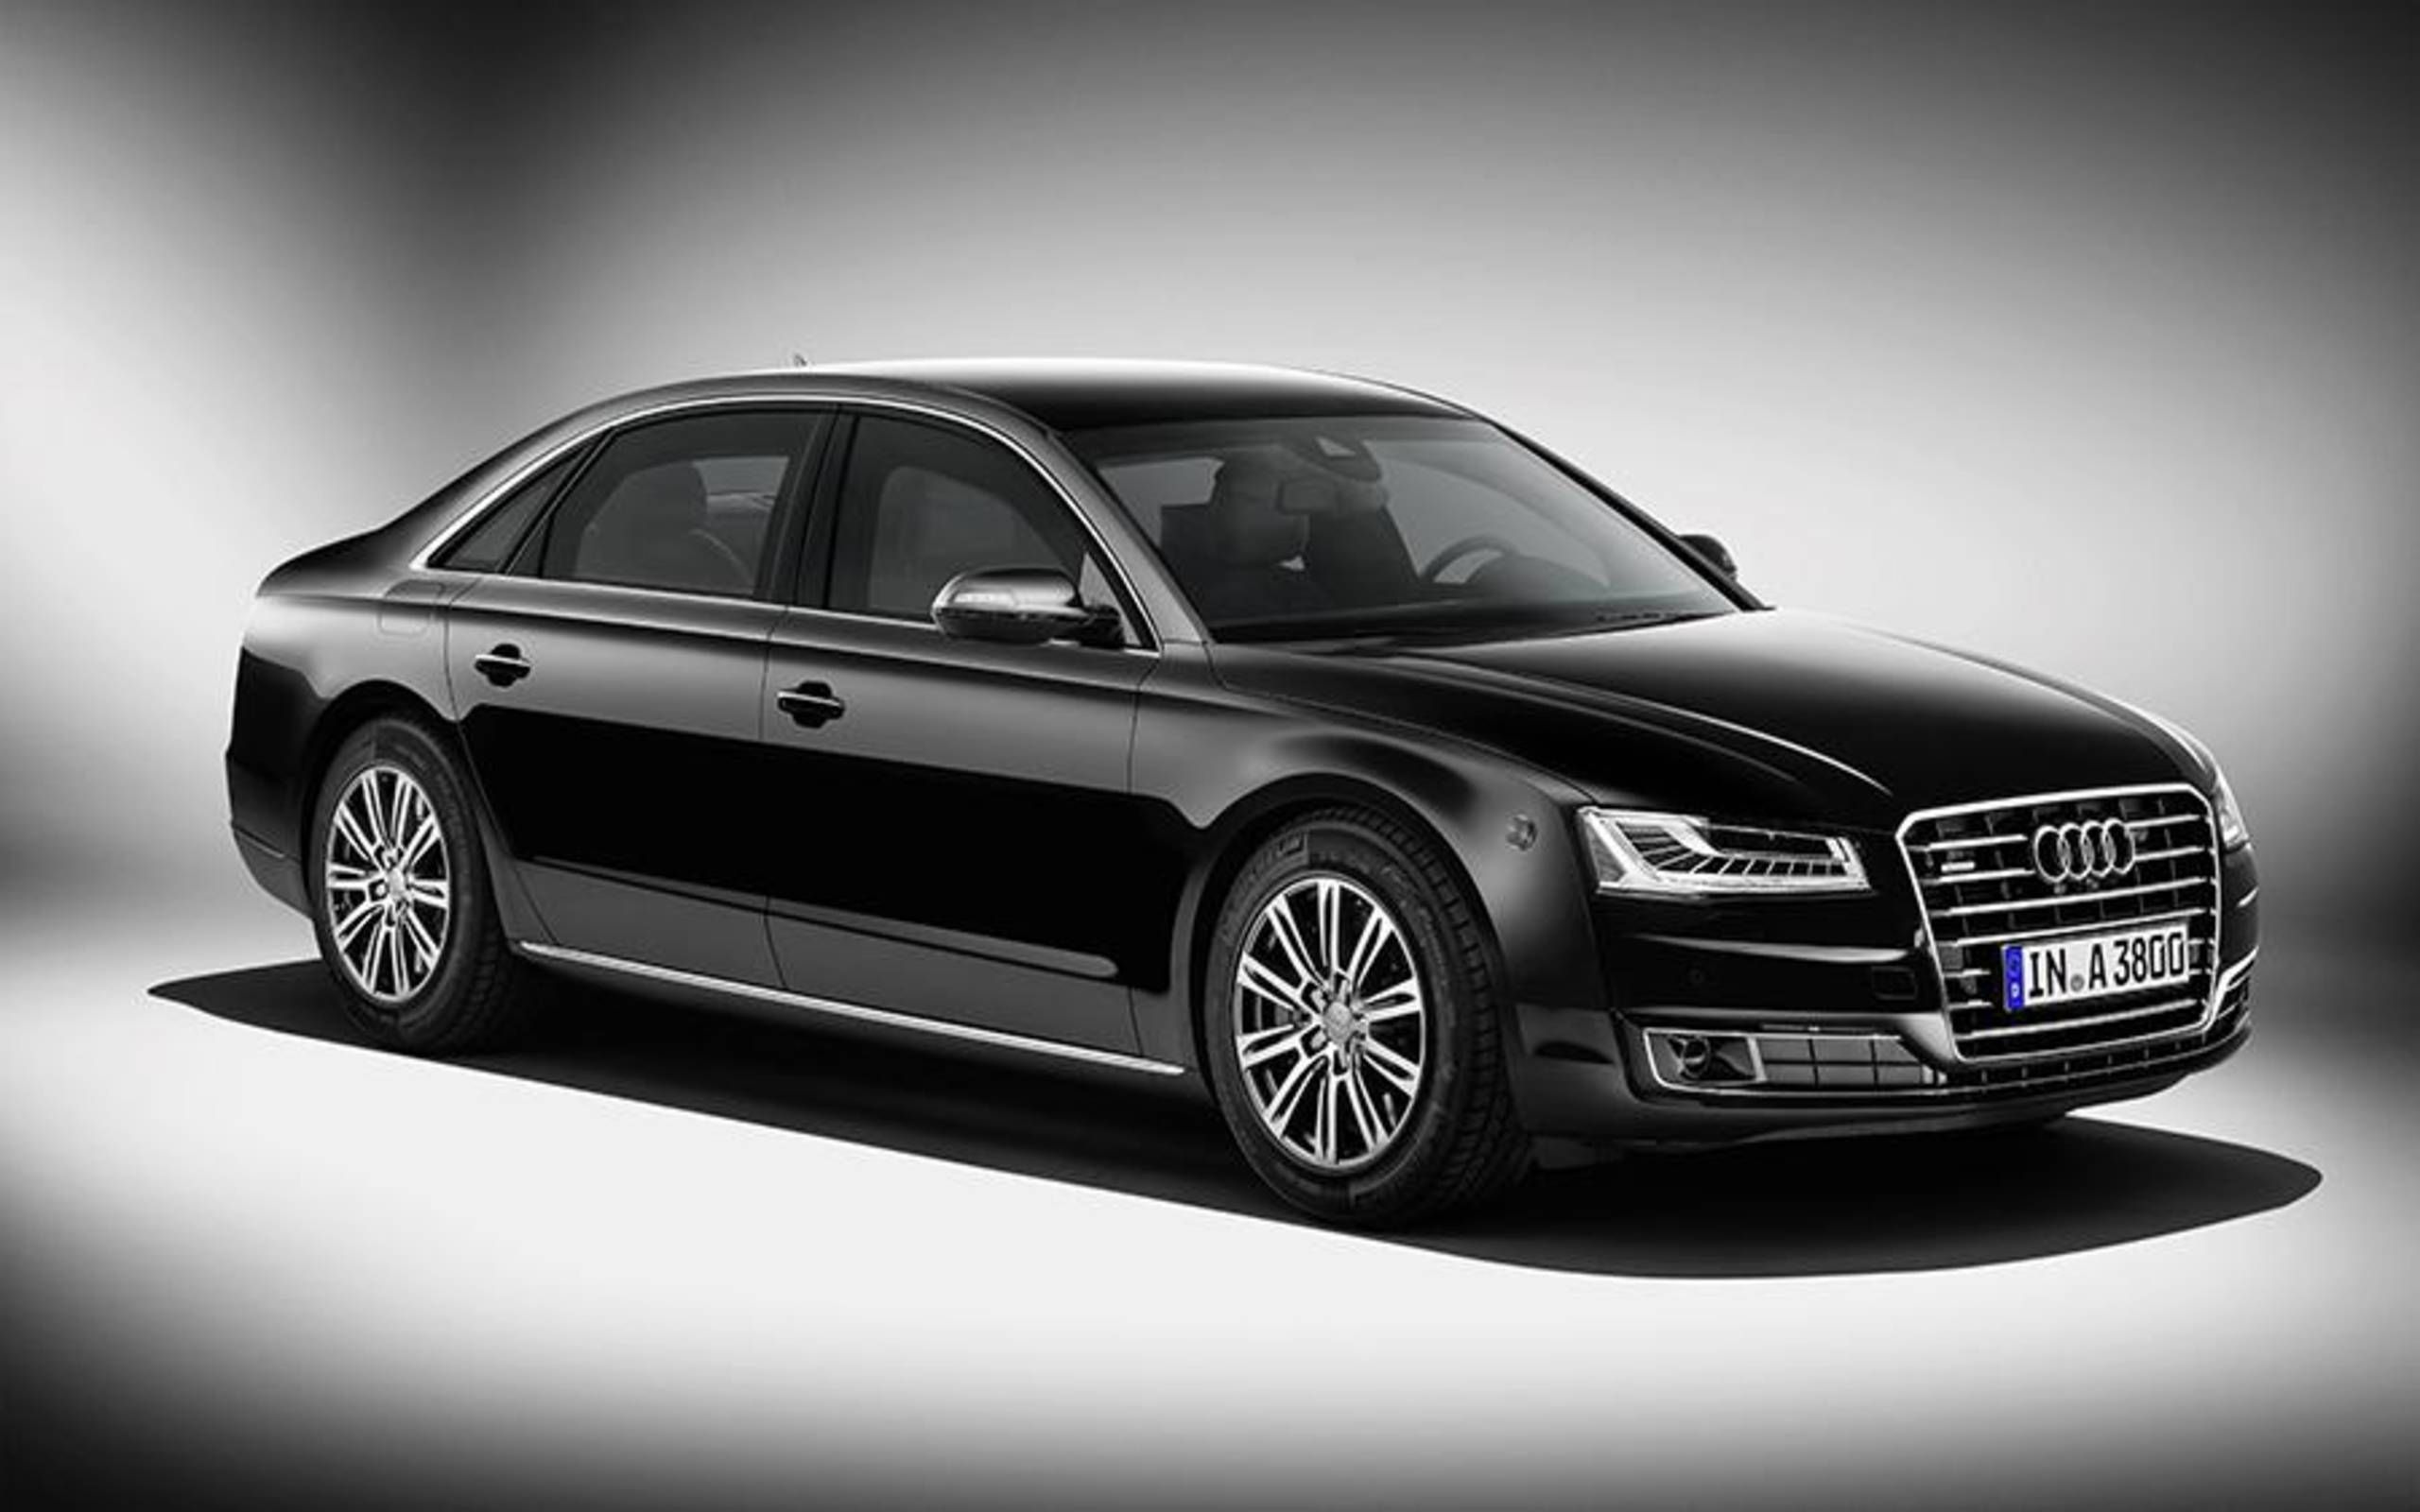 This Audi A8 is grenade-proof